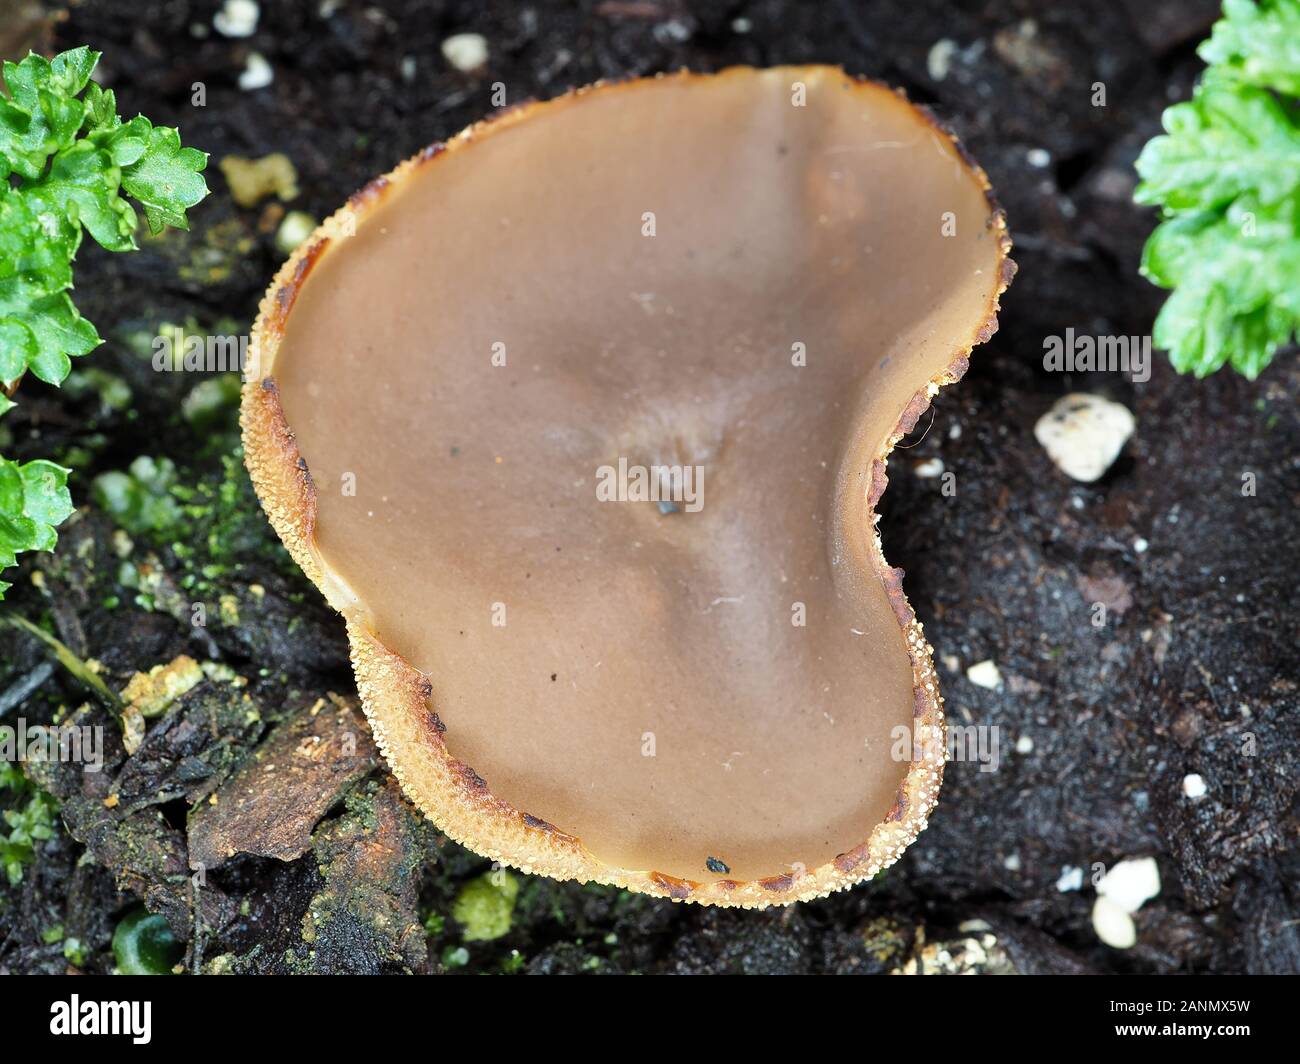 Fungus identified as Peziza repanda (also known as Palomino cup or recurved cup), growing in an over-watered gardening container Stock Photo